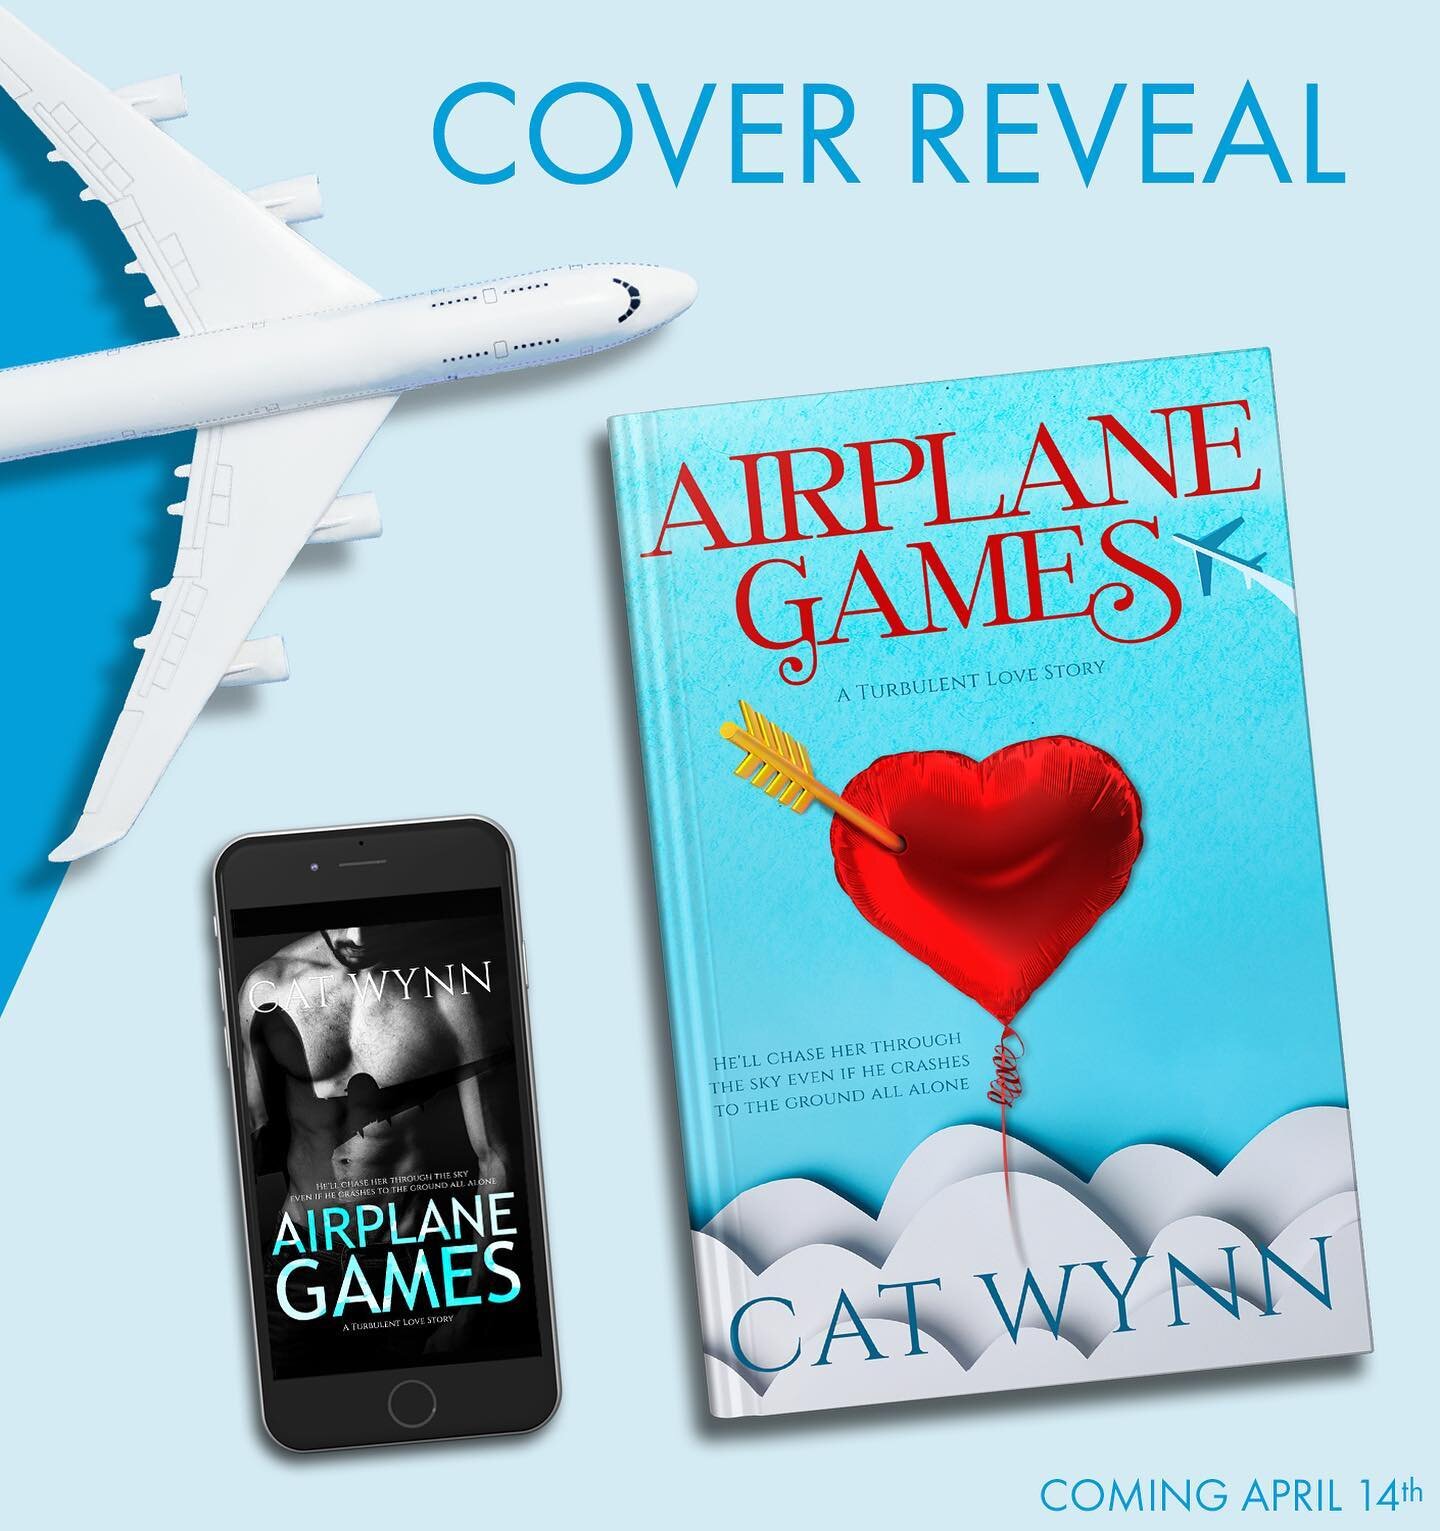 ✈️ AIRPLANE GAMES ✈️ COVER REVEAL

Covers by @coverapothecary 

It&rsquo;s Up in the Air meets Breakfast at Tiffany&rsquo;s&hellip; but very dirty. 

Parker Donne wants to plant his feet on the ground, get married and start a family. Unfortunately hi